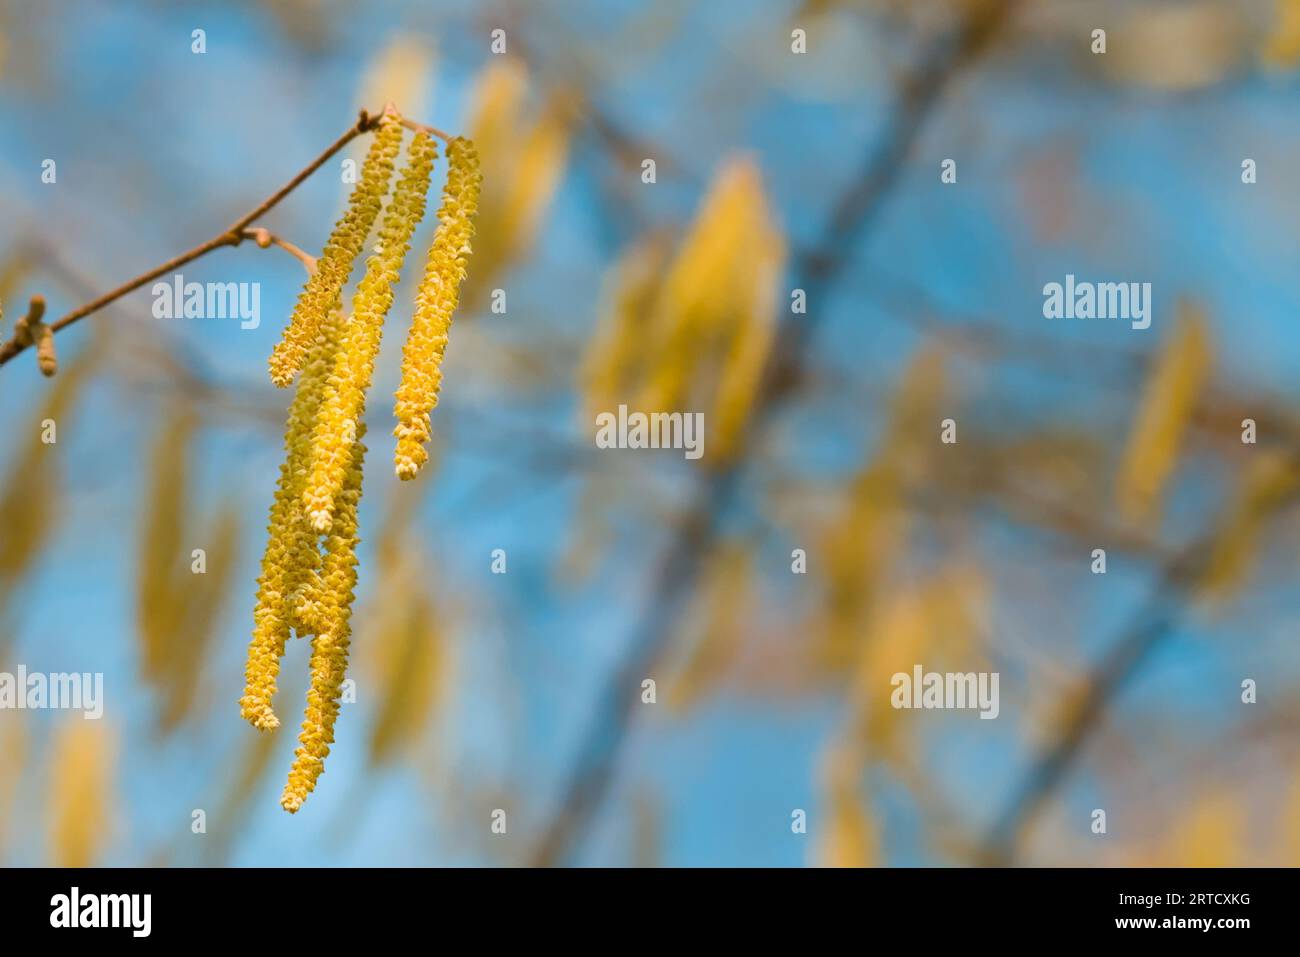 Golden Catkins, Flowers Of The Hazel Tree, Corylus avellana, On A Sunny Day, New Forest, England UK Stock Photo